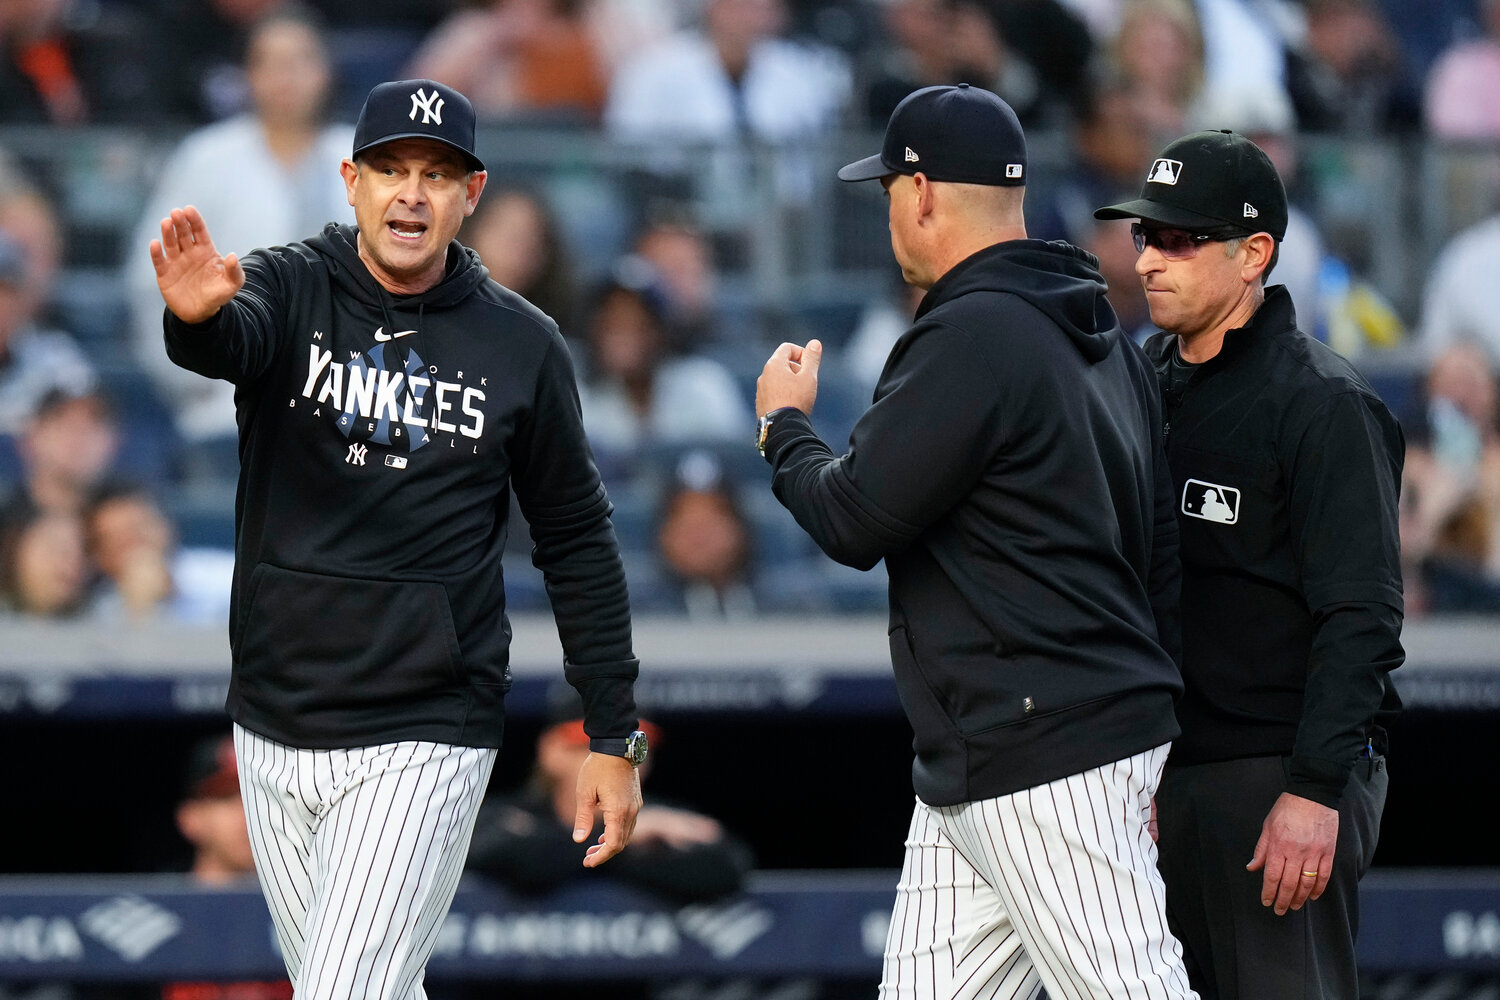 New York Yankees manager Aaron Boone, left, argues with umpire Chris Guccione, right, after Boone was ejected during the third inning of the team's game against the Baltimore Orioles on Thursday night in New York.